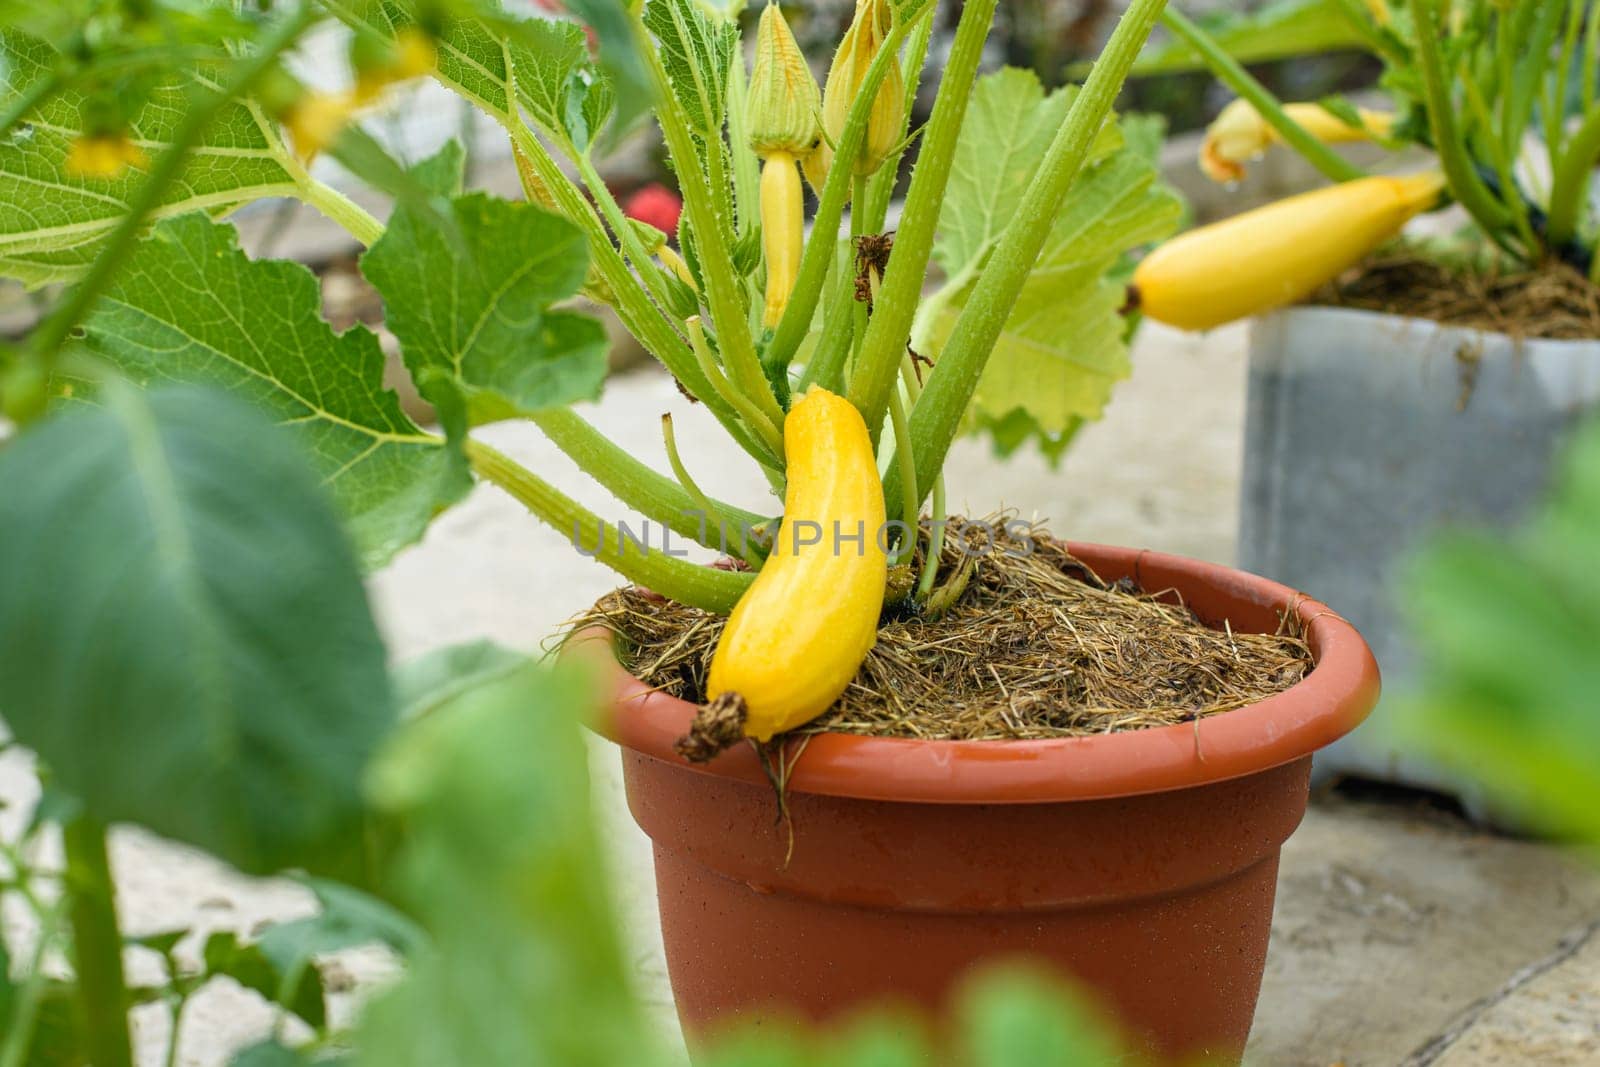 Growing yellow zucchini in plastic flower pots by Madhourse